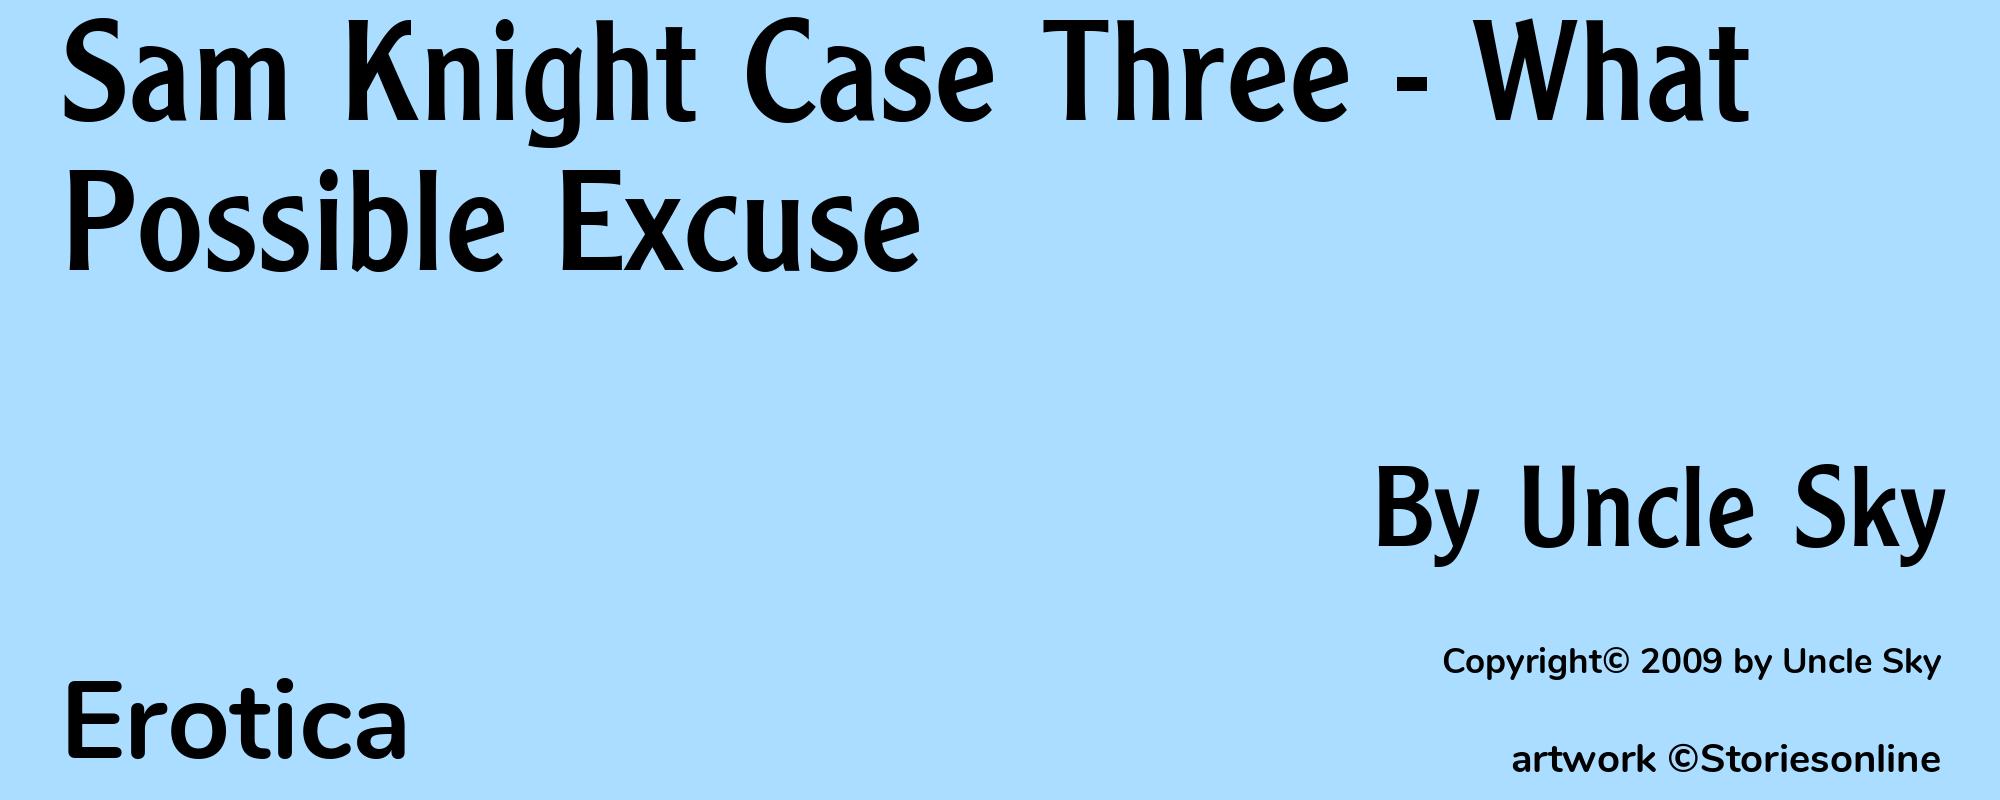 Sam Knight Case Three - What Possible Excuse - Cover